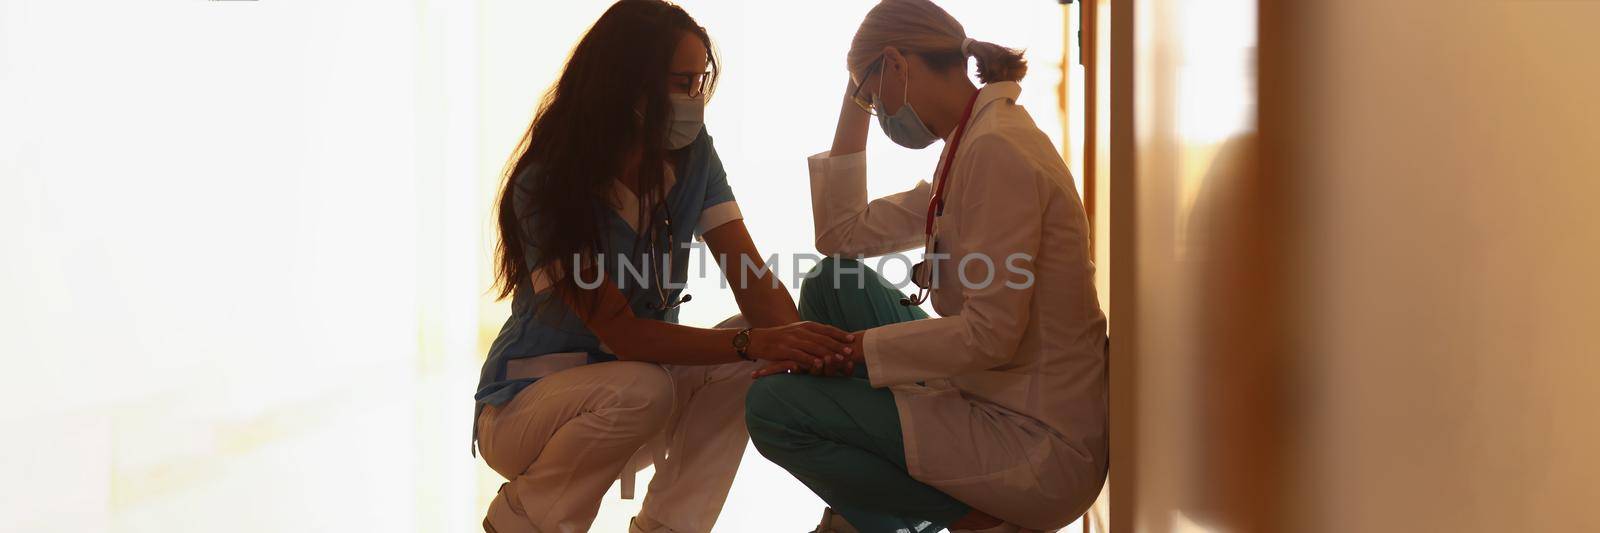 Low angle of tired medical worker after hard long surgery sitting on floor. Nurse support colleague doctor. Medicine, save life, health, tragedy concept